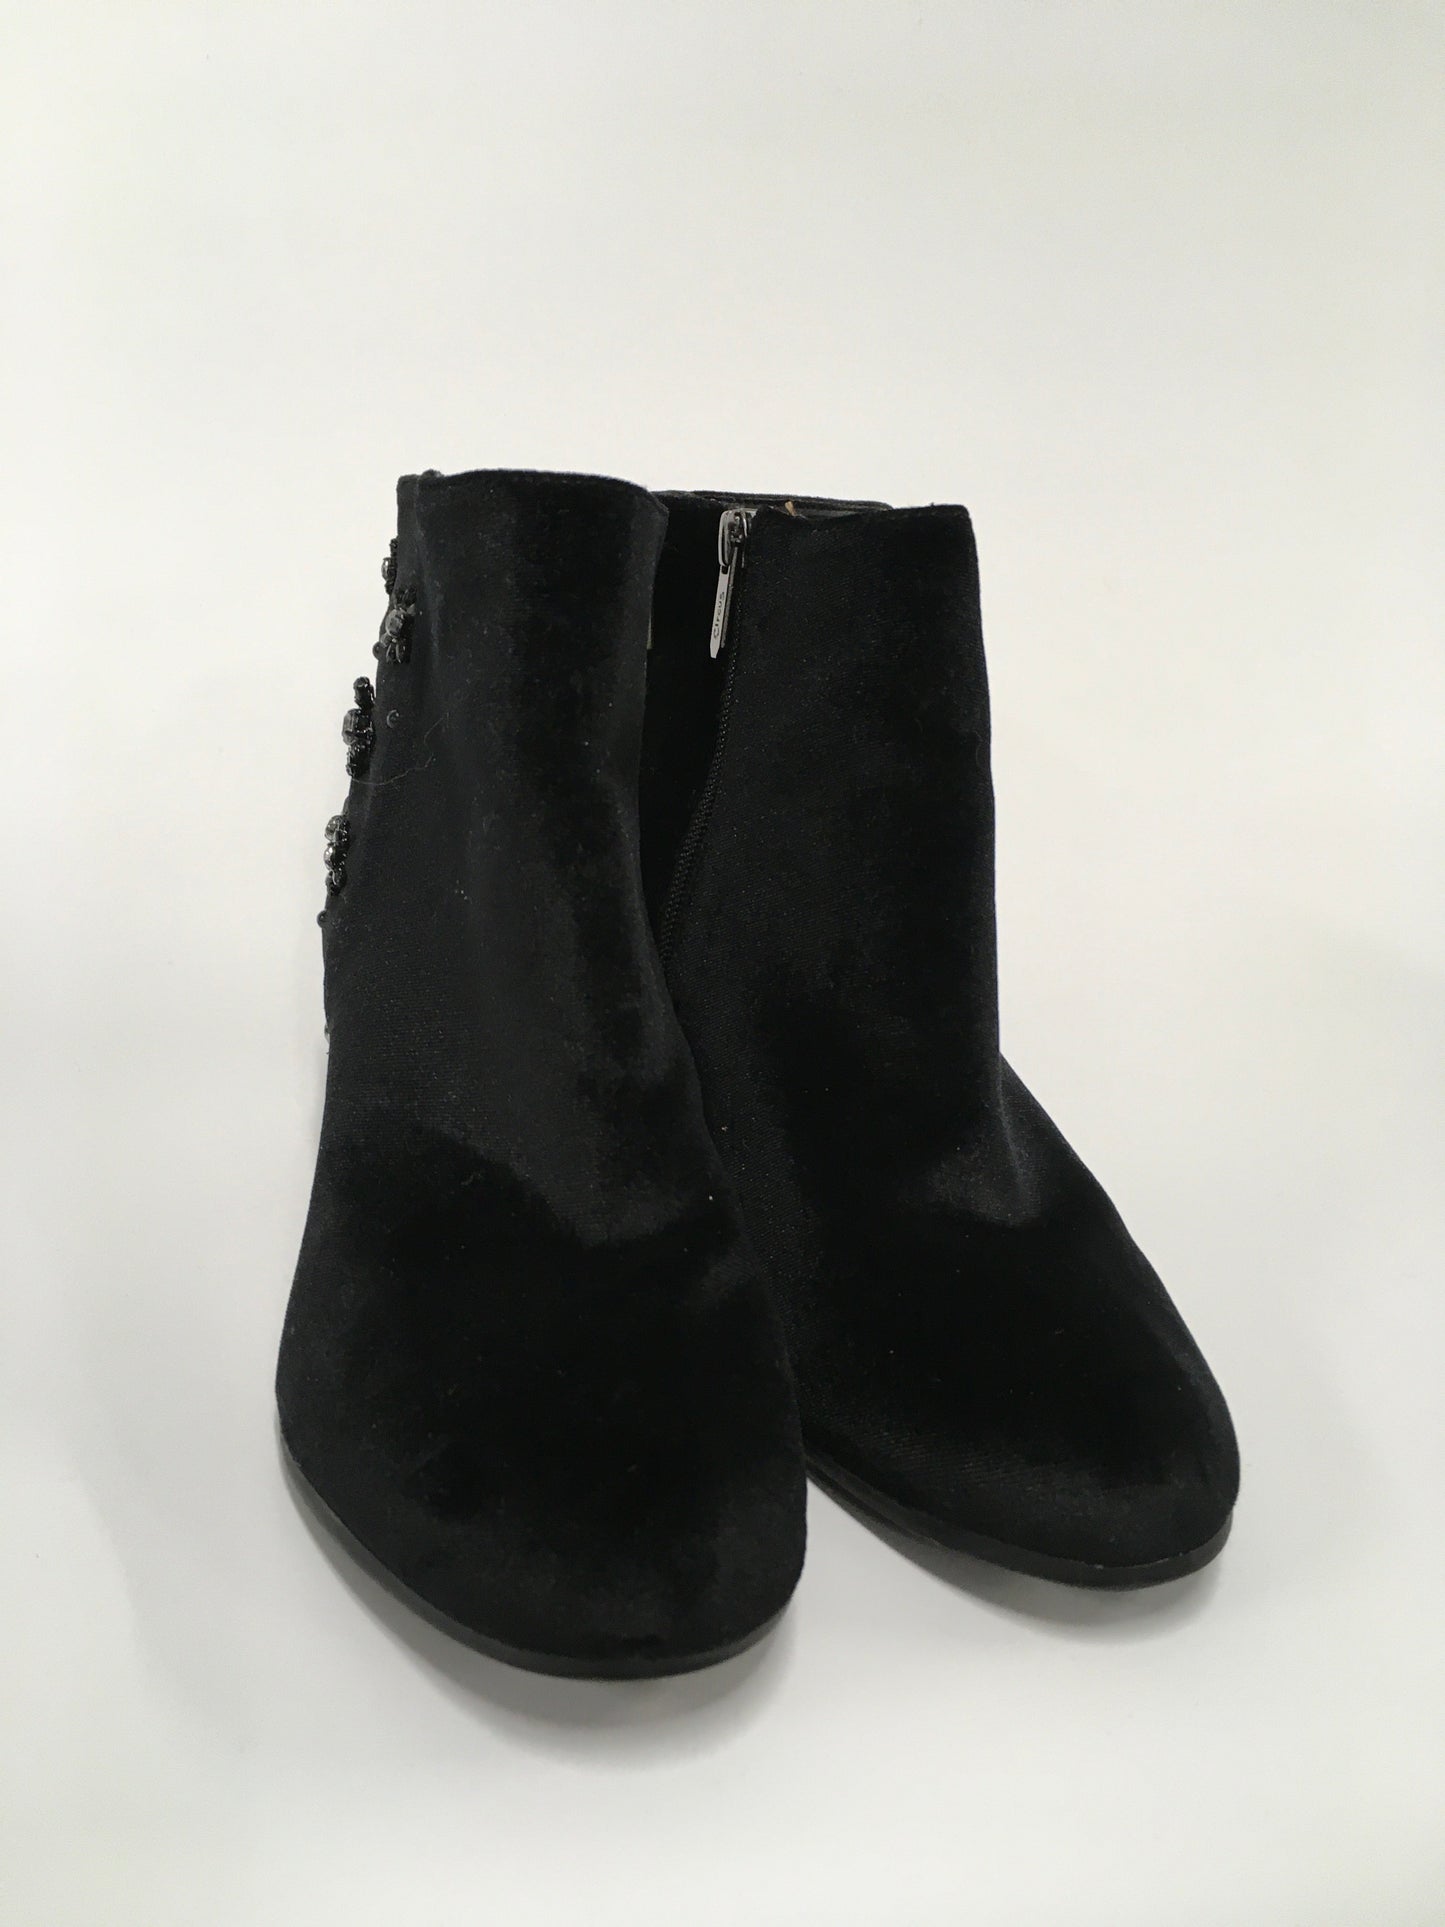 Boots Ankle Heels By Circus By Sam Edelman  Size: 8.5